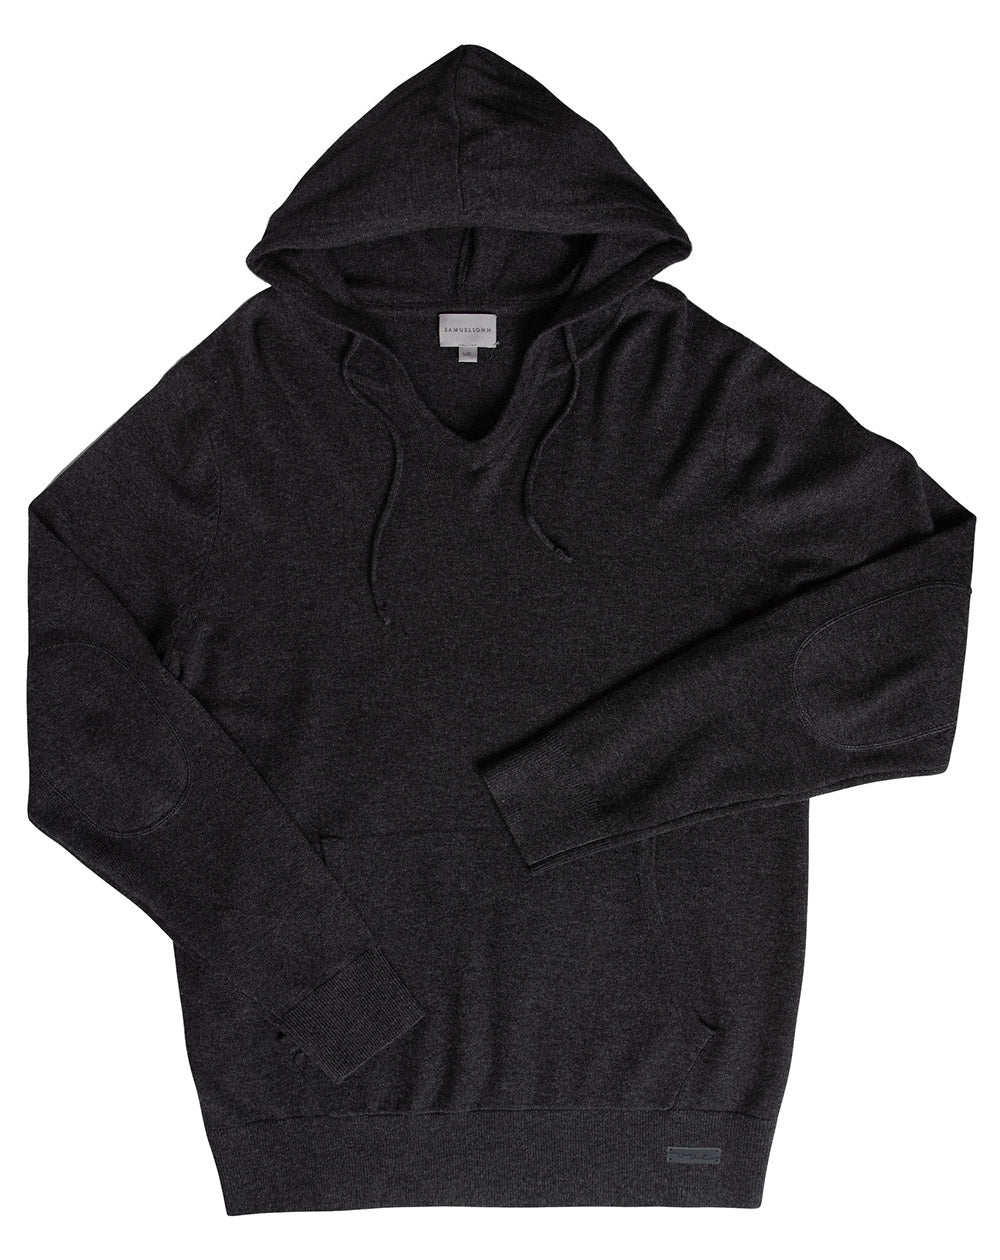 Charcoal Cashmere Wool Hooded Sweater